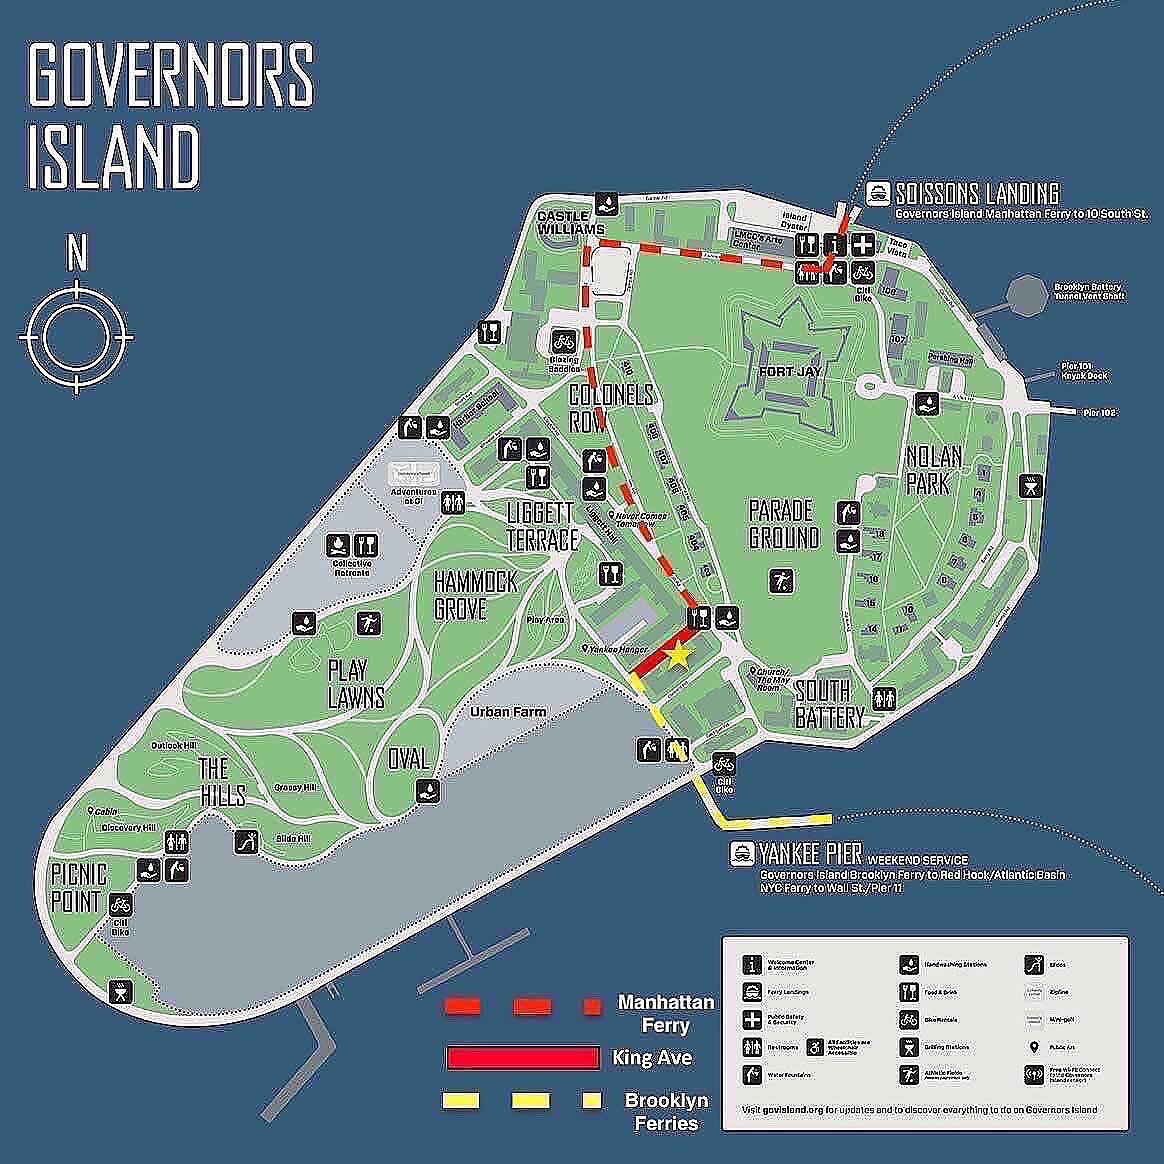 Looking for the best weekend getaway 🤔 from the city? We're excited to be back at @governorsisland this weekend, June 18+19, for our monthly residency - every 3️⃣rd weekend from May to October, with a rotating roster of incredible makers and artists